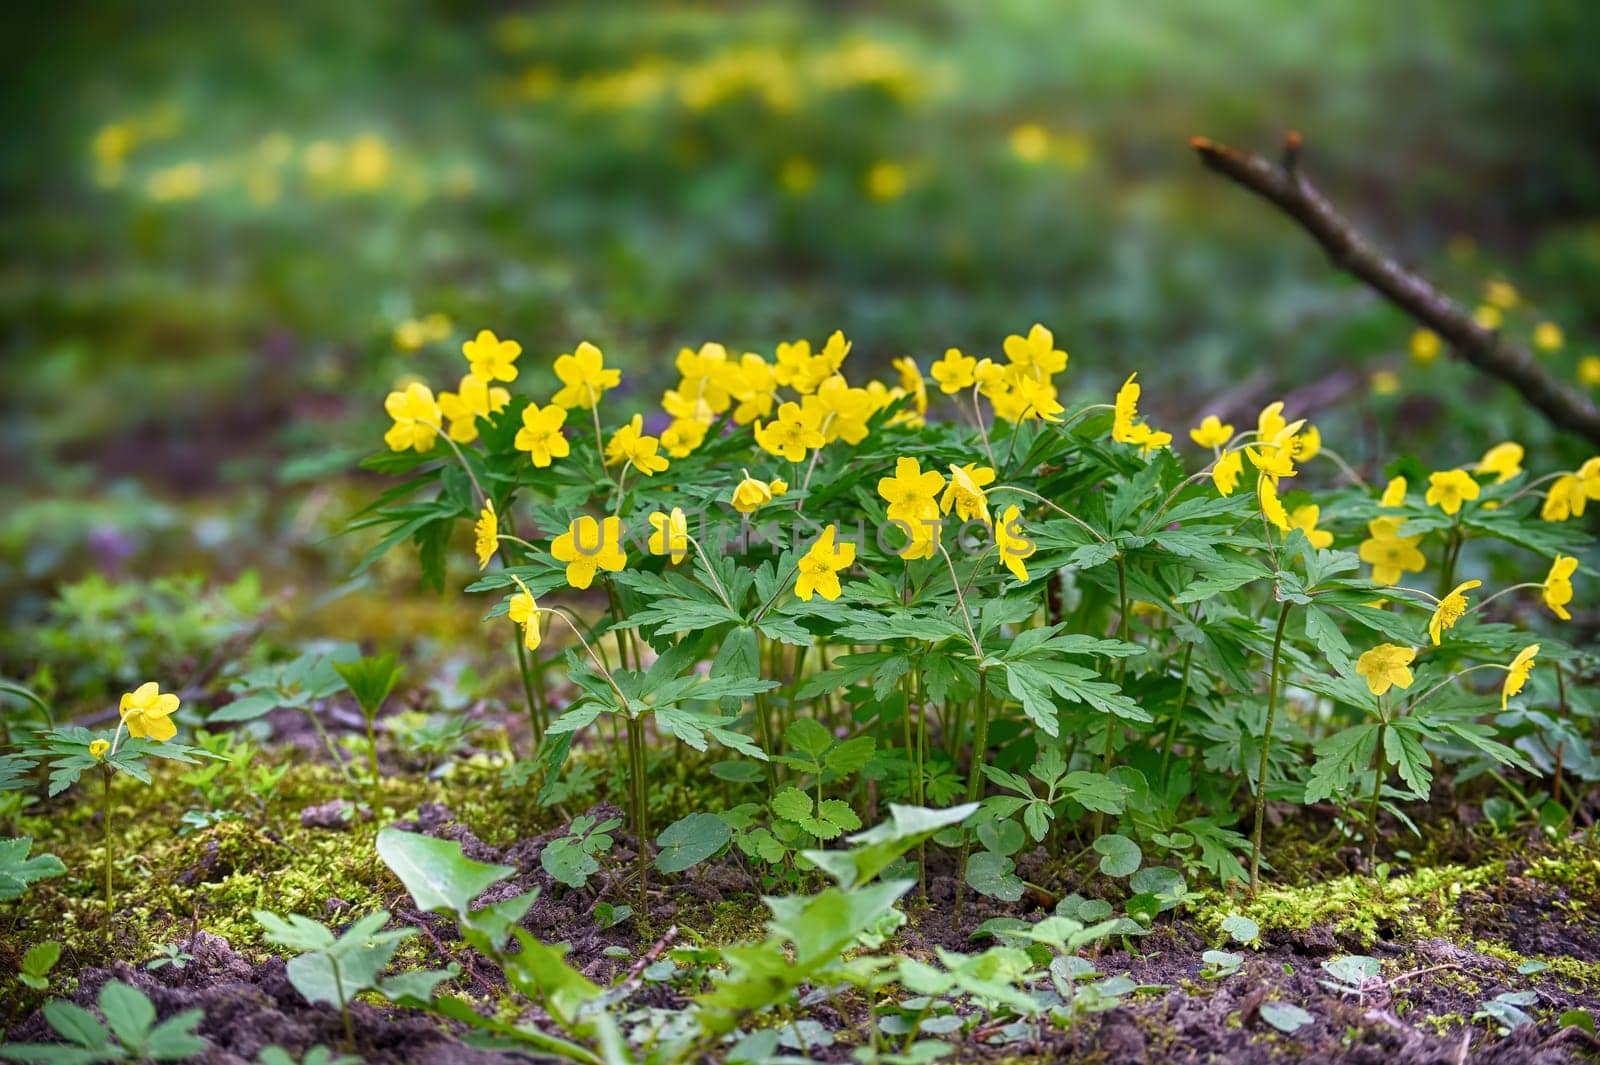 Cluster of yellow marsh marigold flowers growing in a forest by NetPix